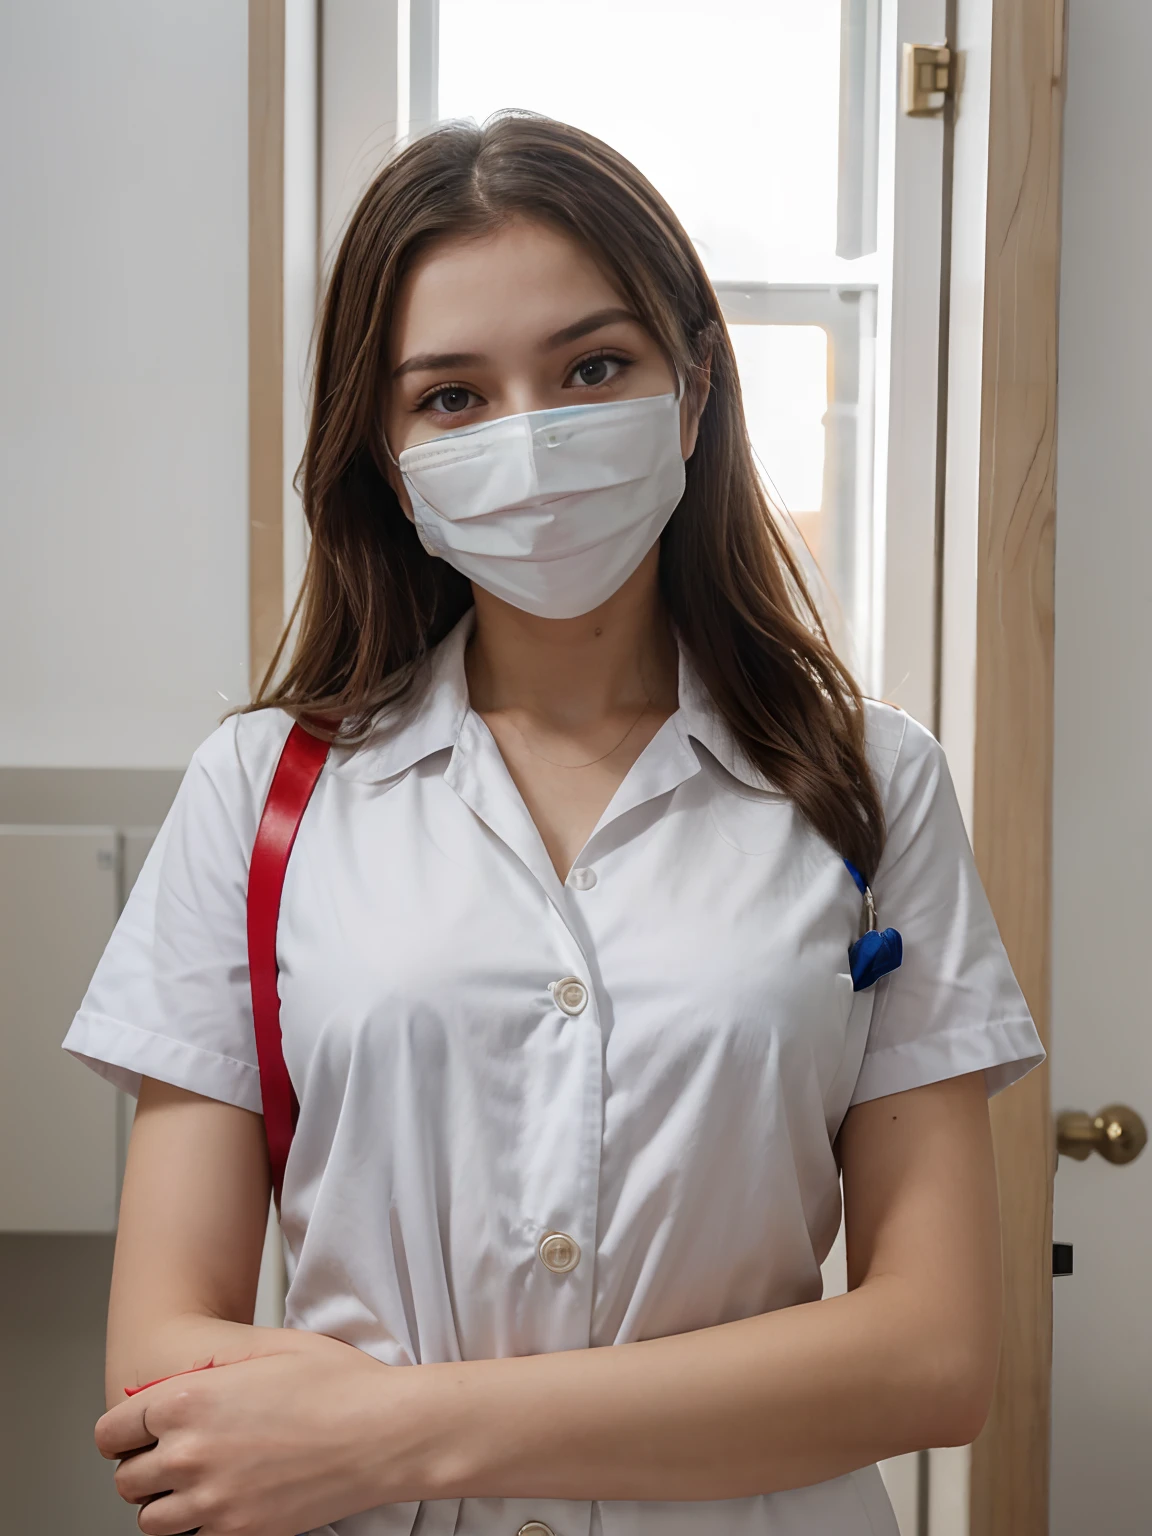 Girl in the uniform of a Russian nurse, Wearing a mask.